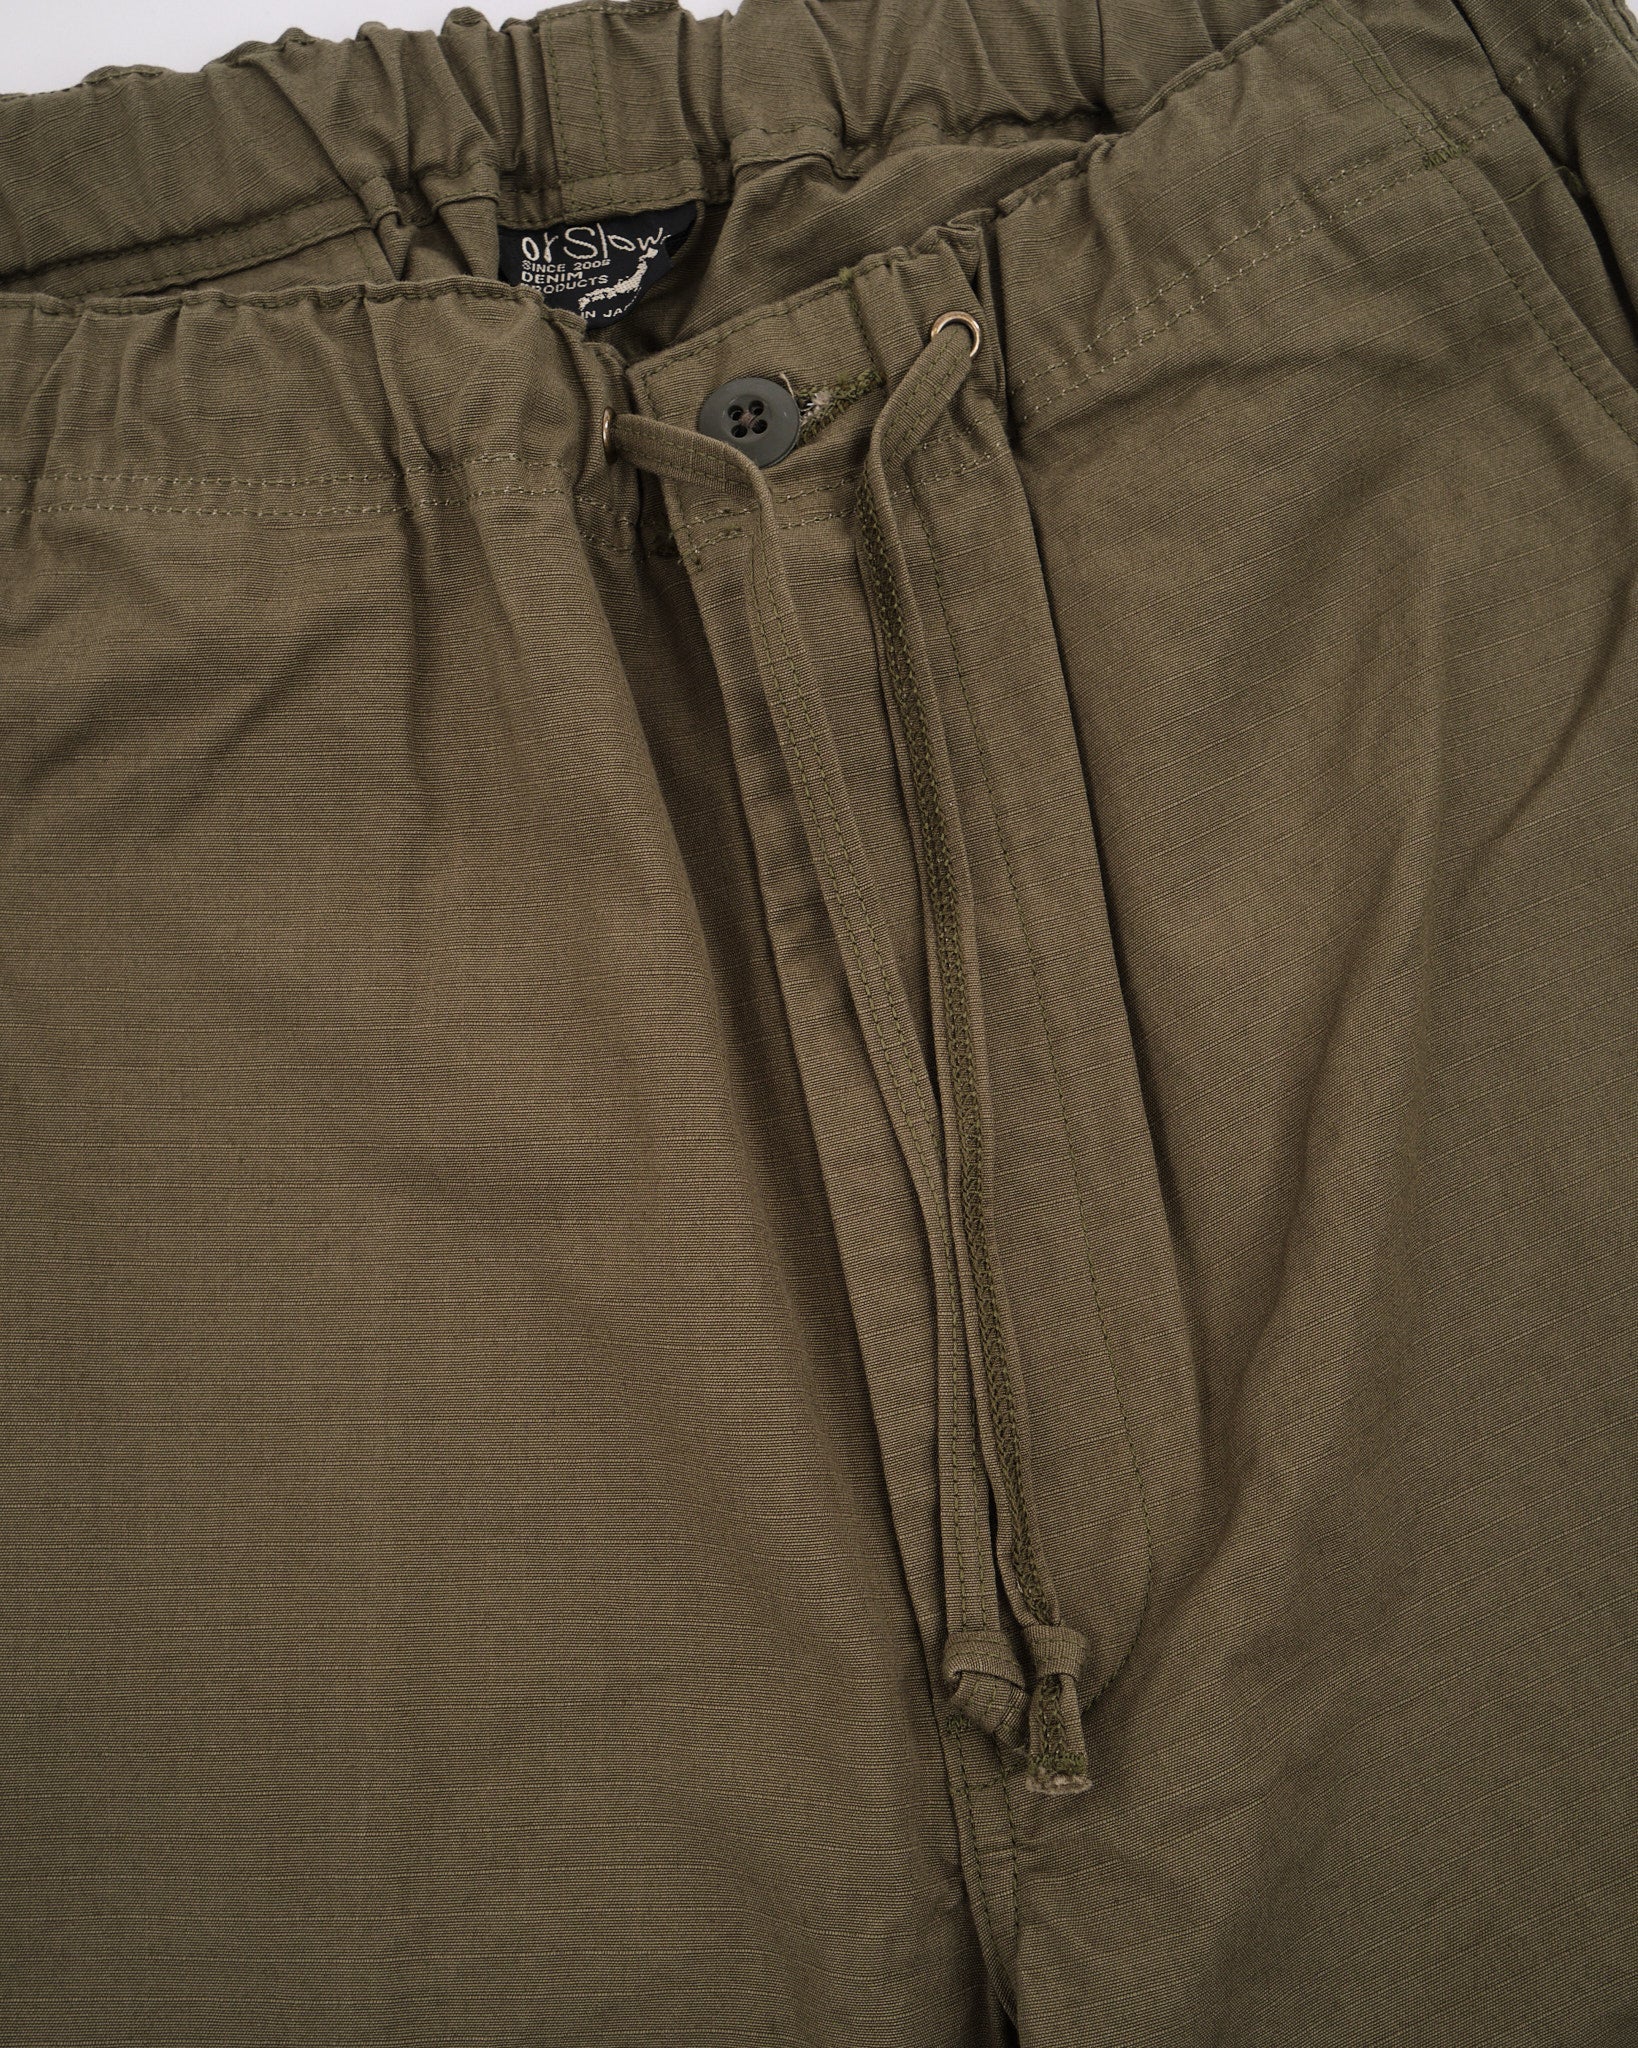 NEW YORKER PANTS ARMY GREEN - Meadow